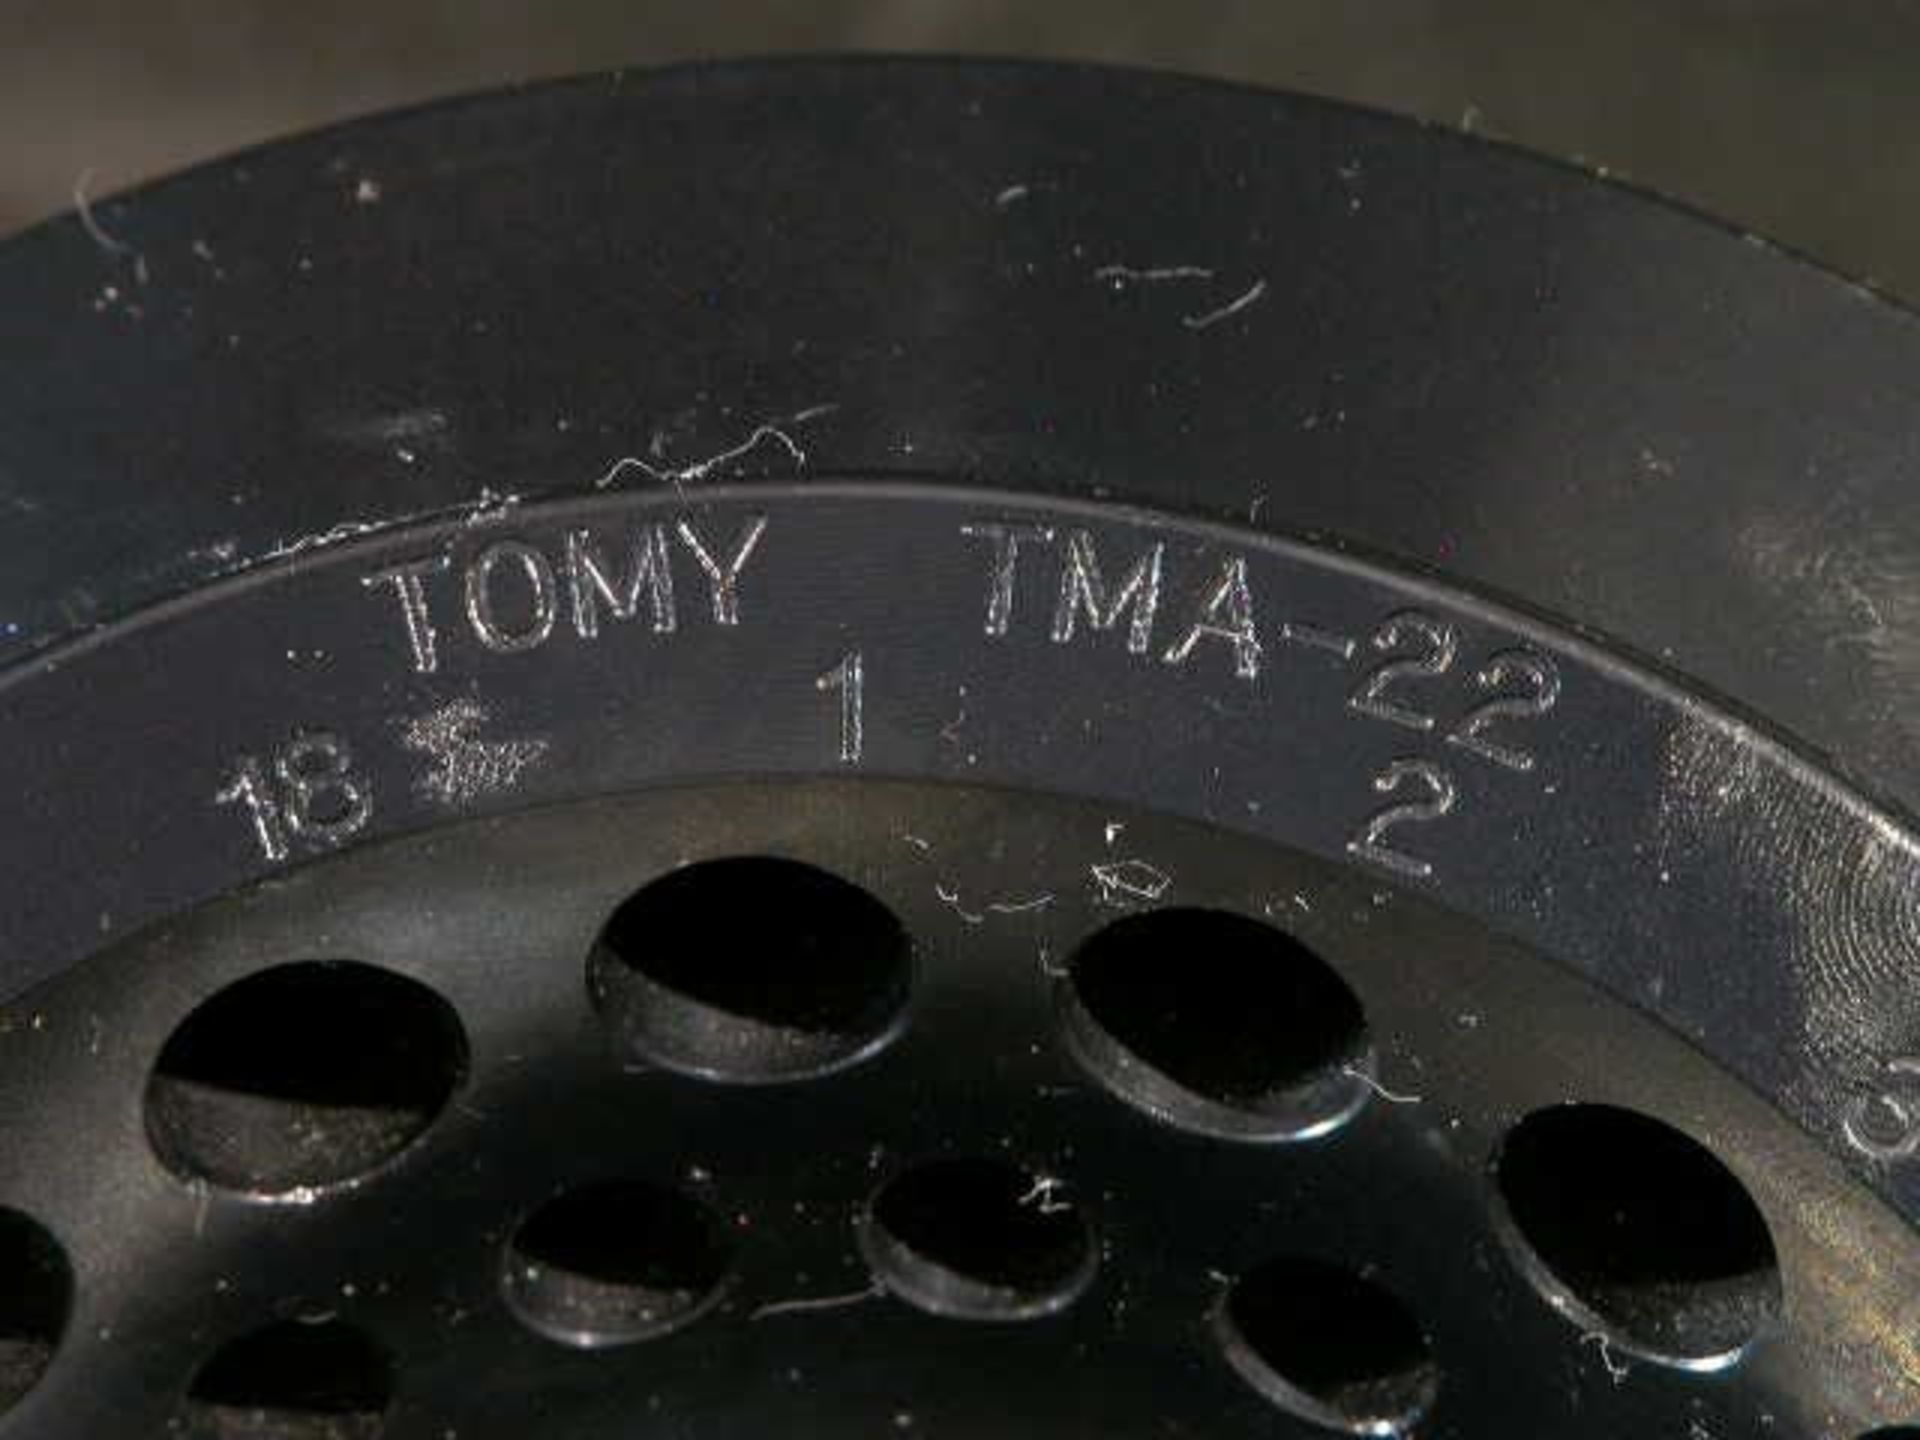 Tomy TMA22 TMA 22 High Speed Microcentrifuge Rotor for TX 160 Centrifuge 16 spot, Qty 1, - Image 5 of 5